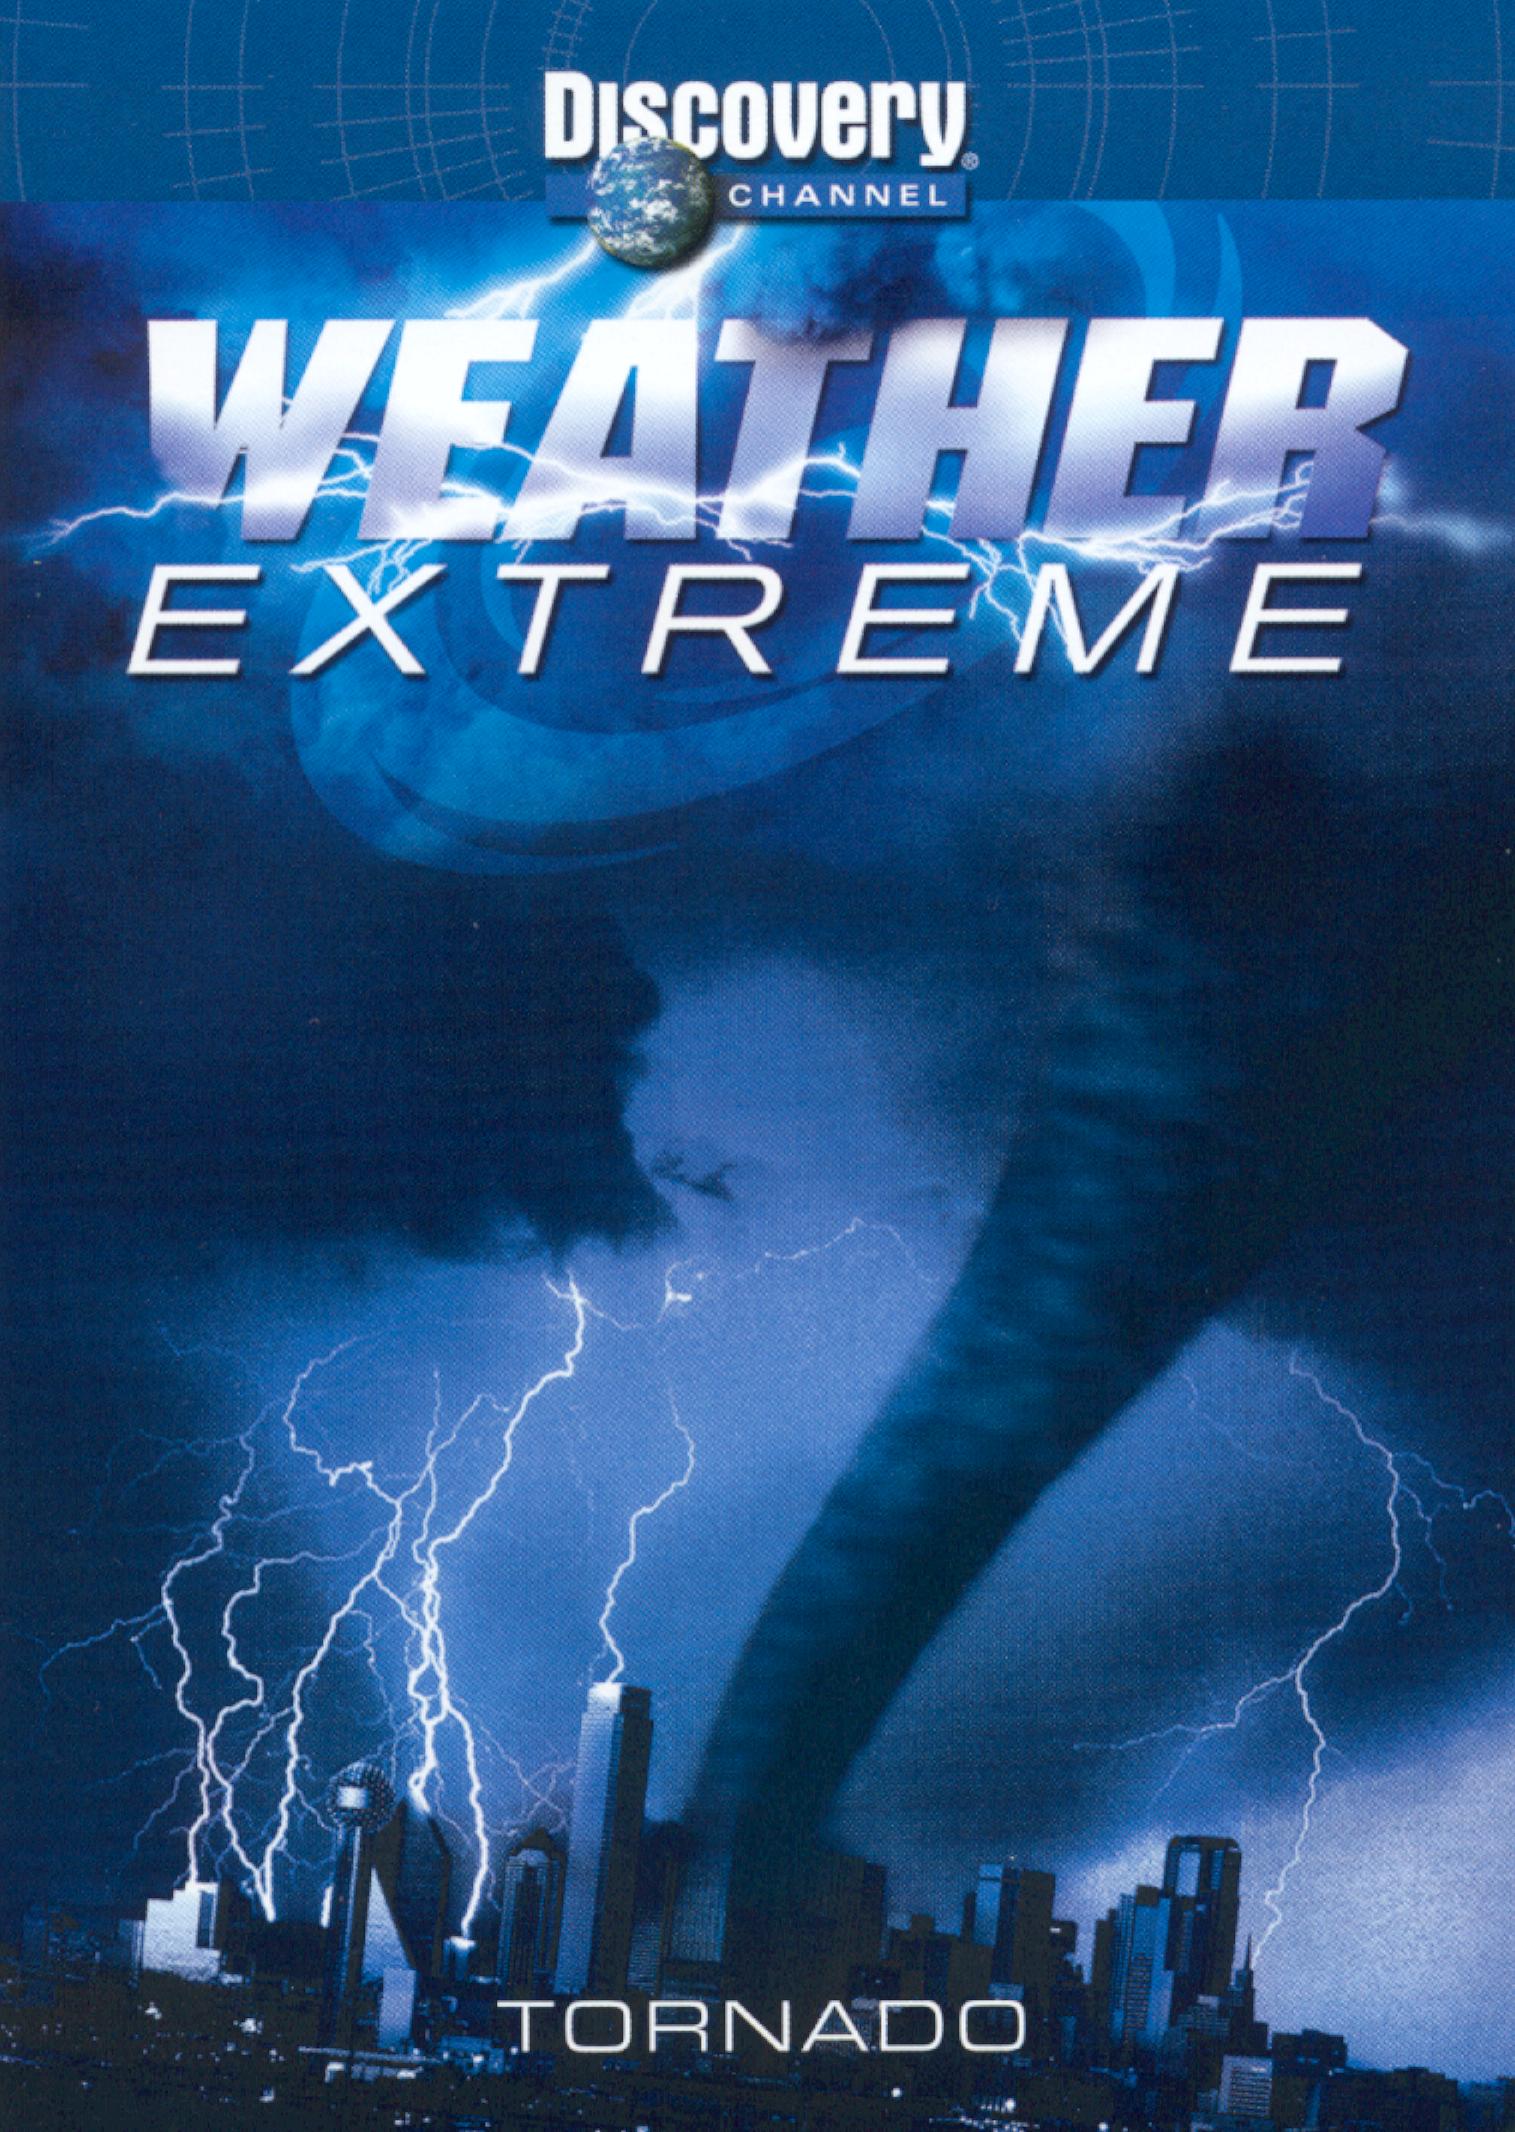 Weather Extreme Tornado (2001) Synopsis, Characteristics, Moods